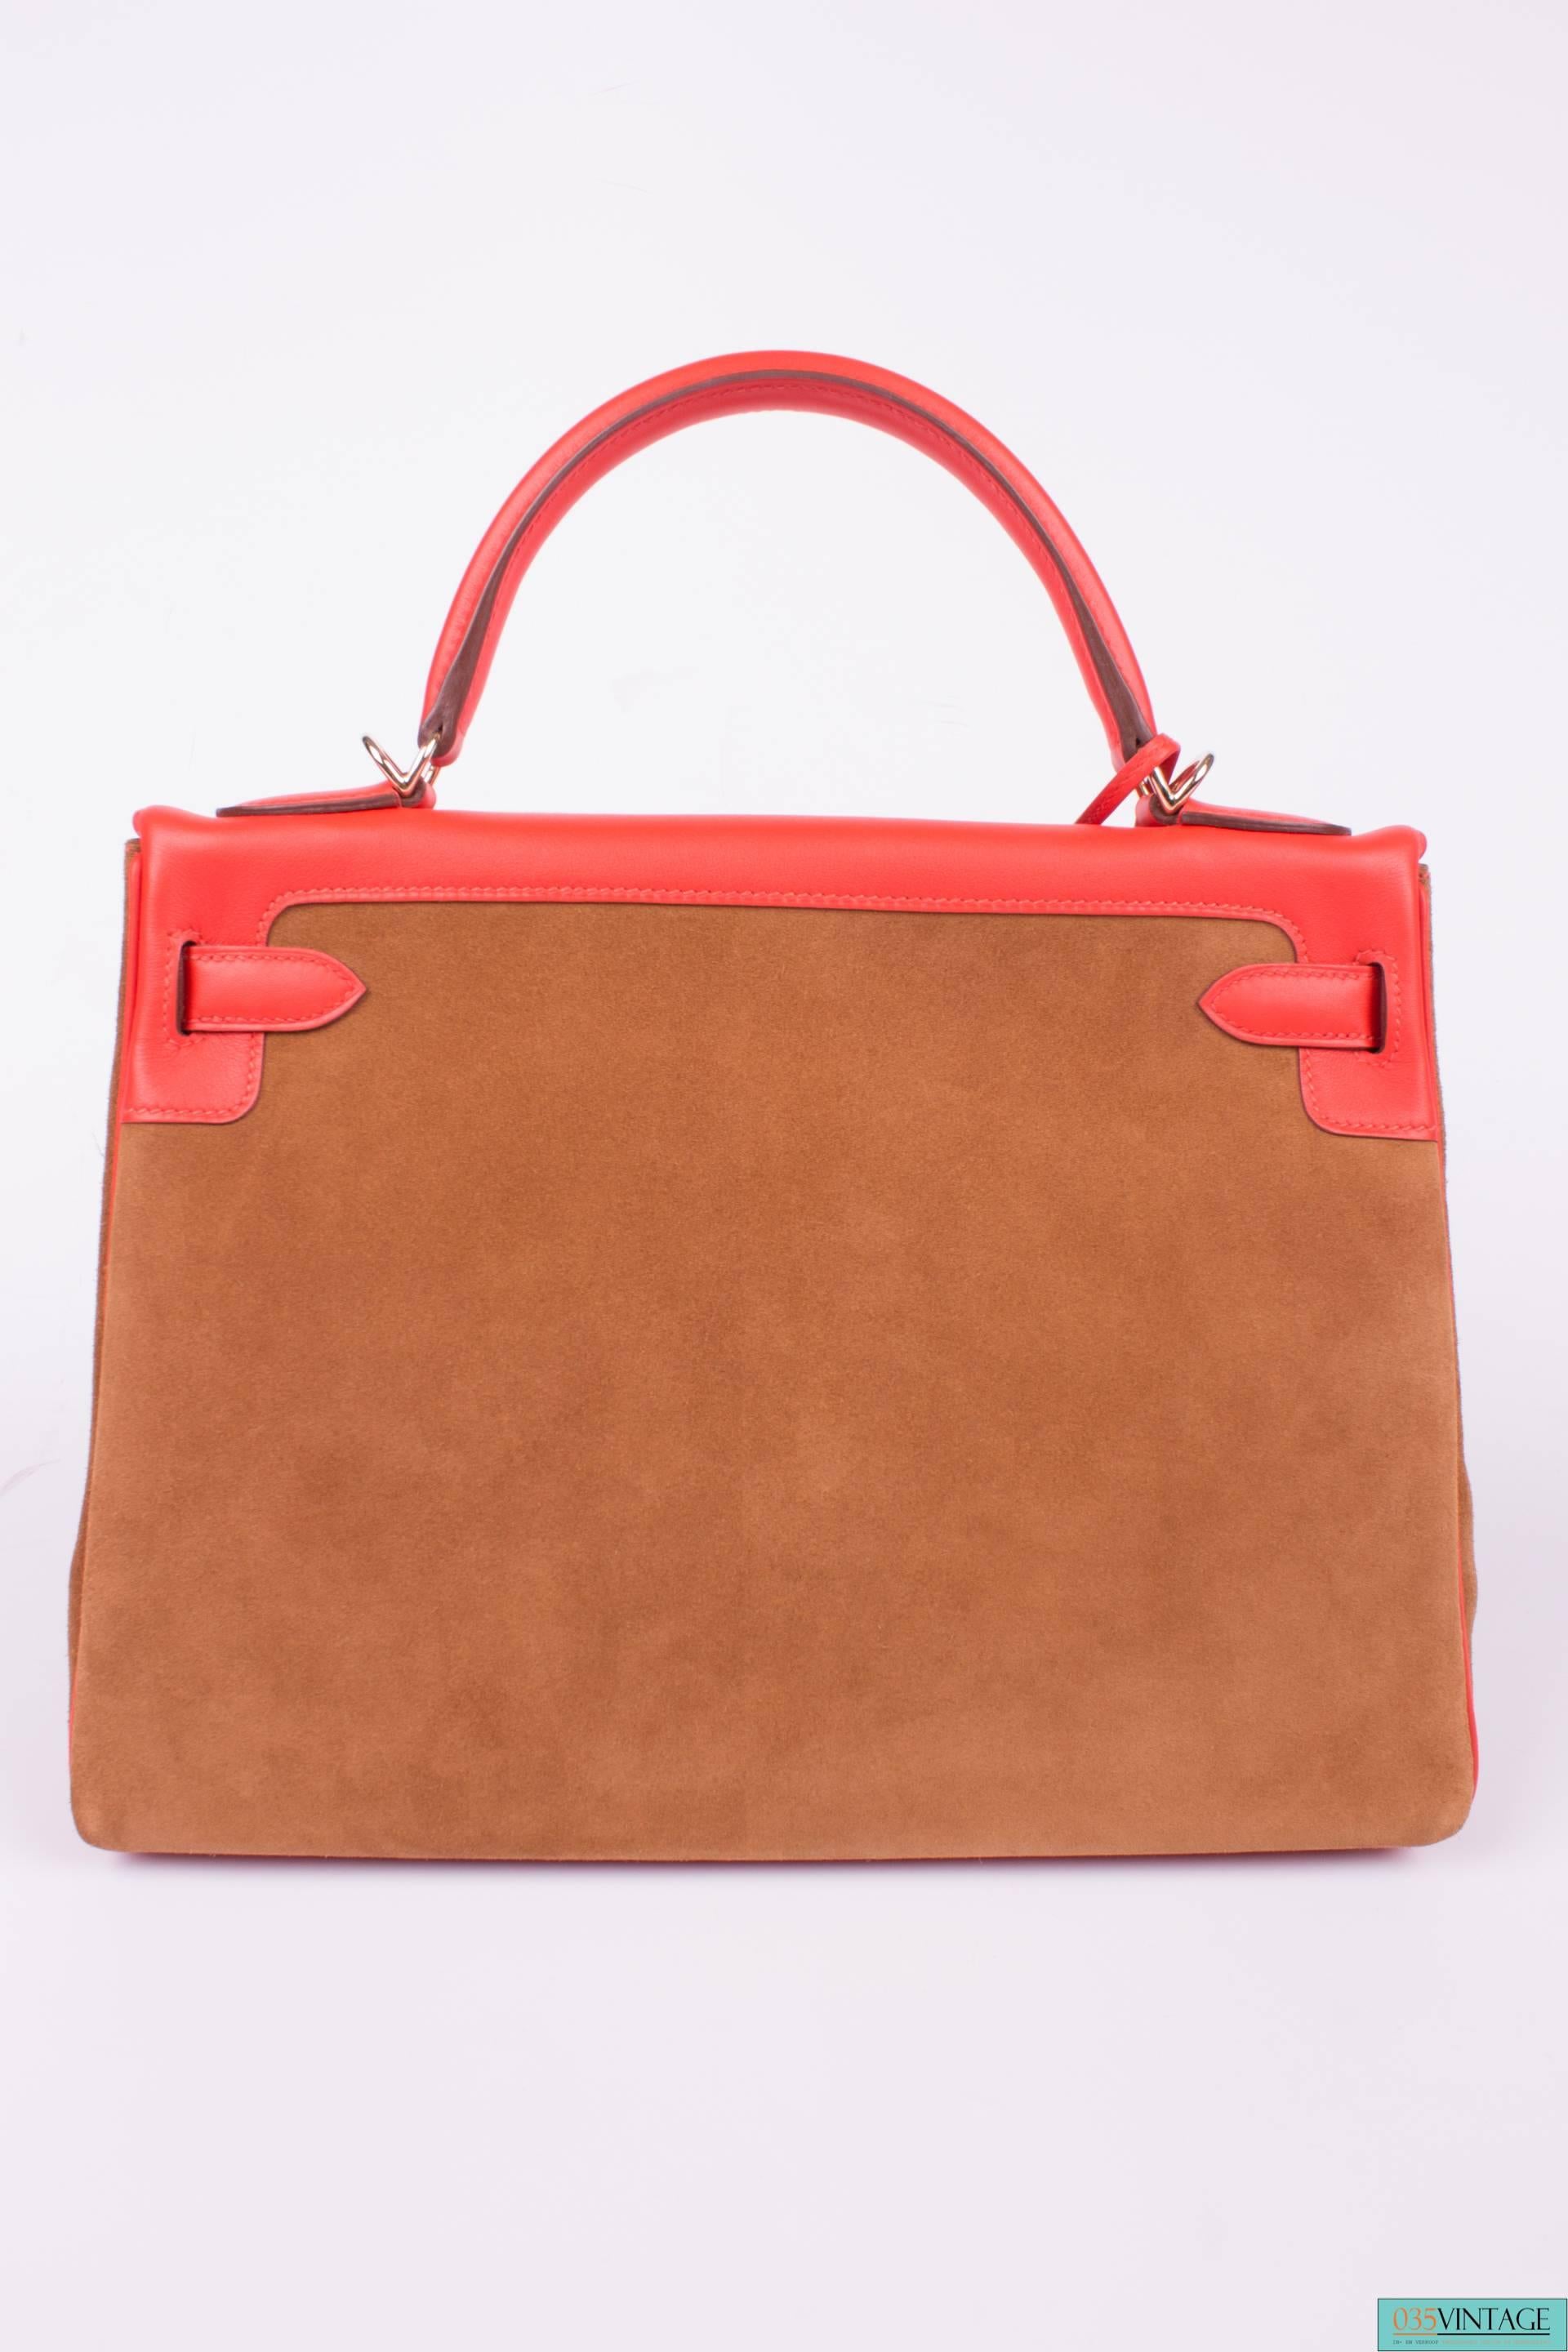 Brown Hermes Kelly 32 Grizzly Bag Very Limited Edition - brown/orange 